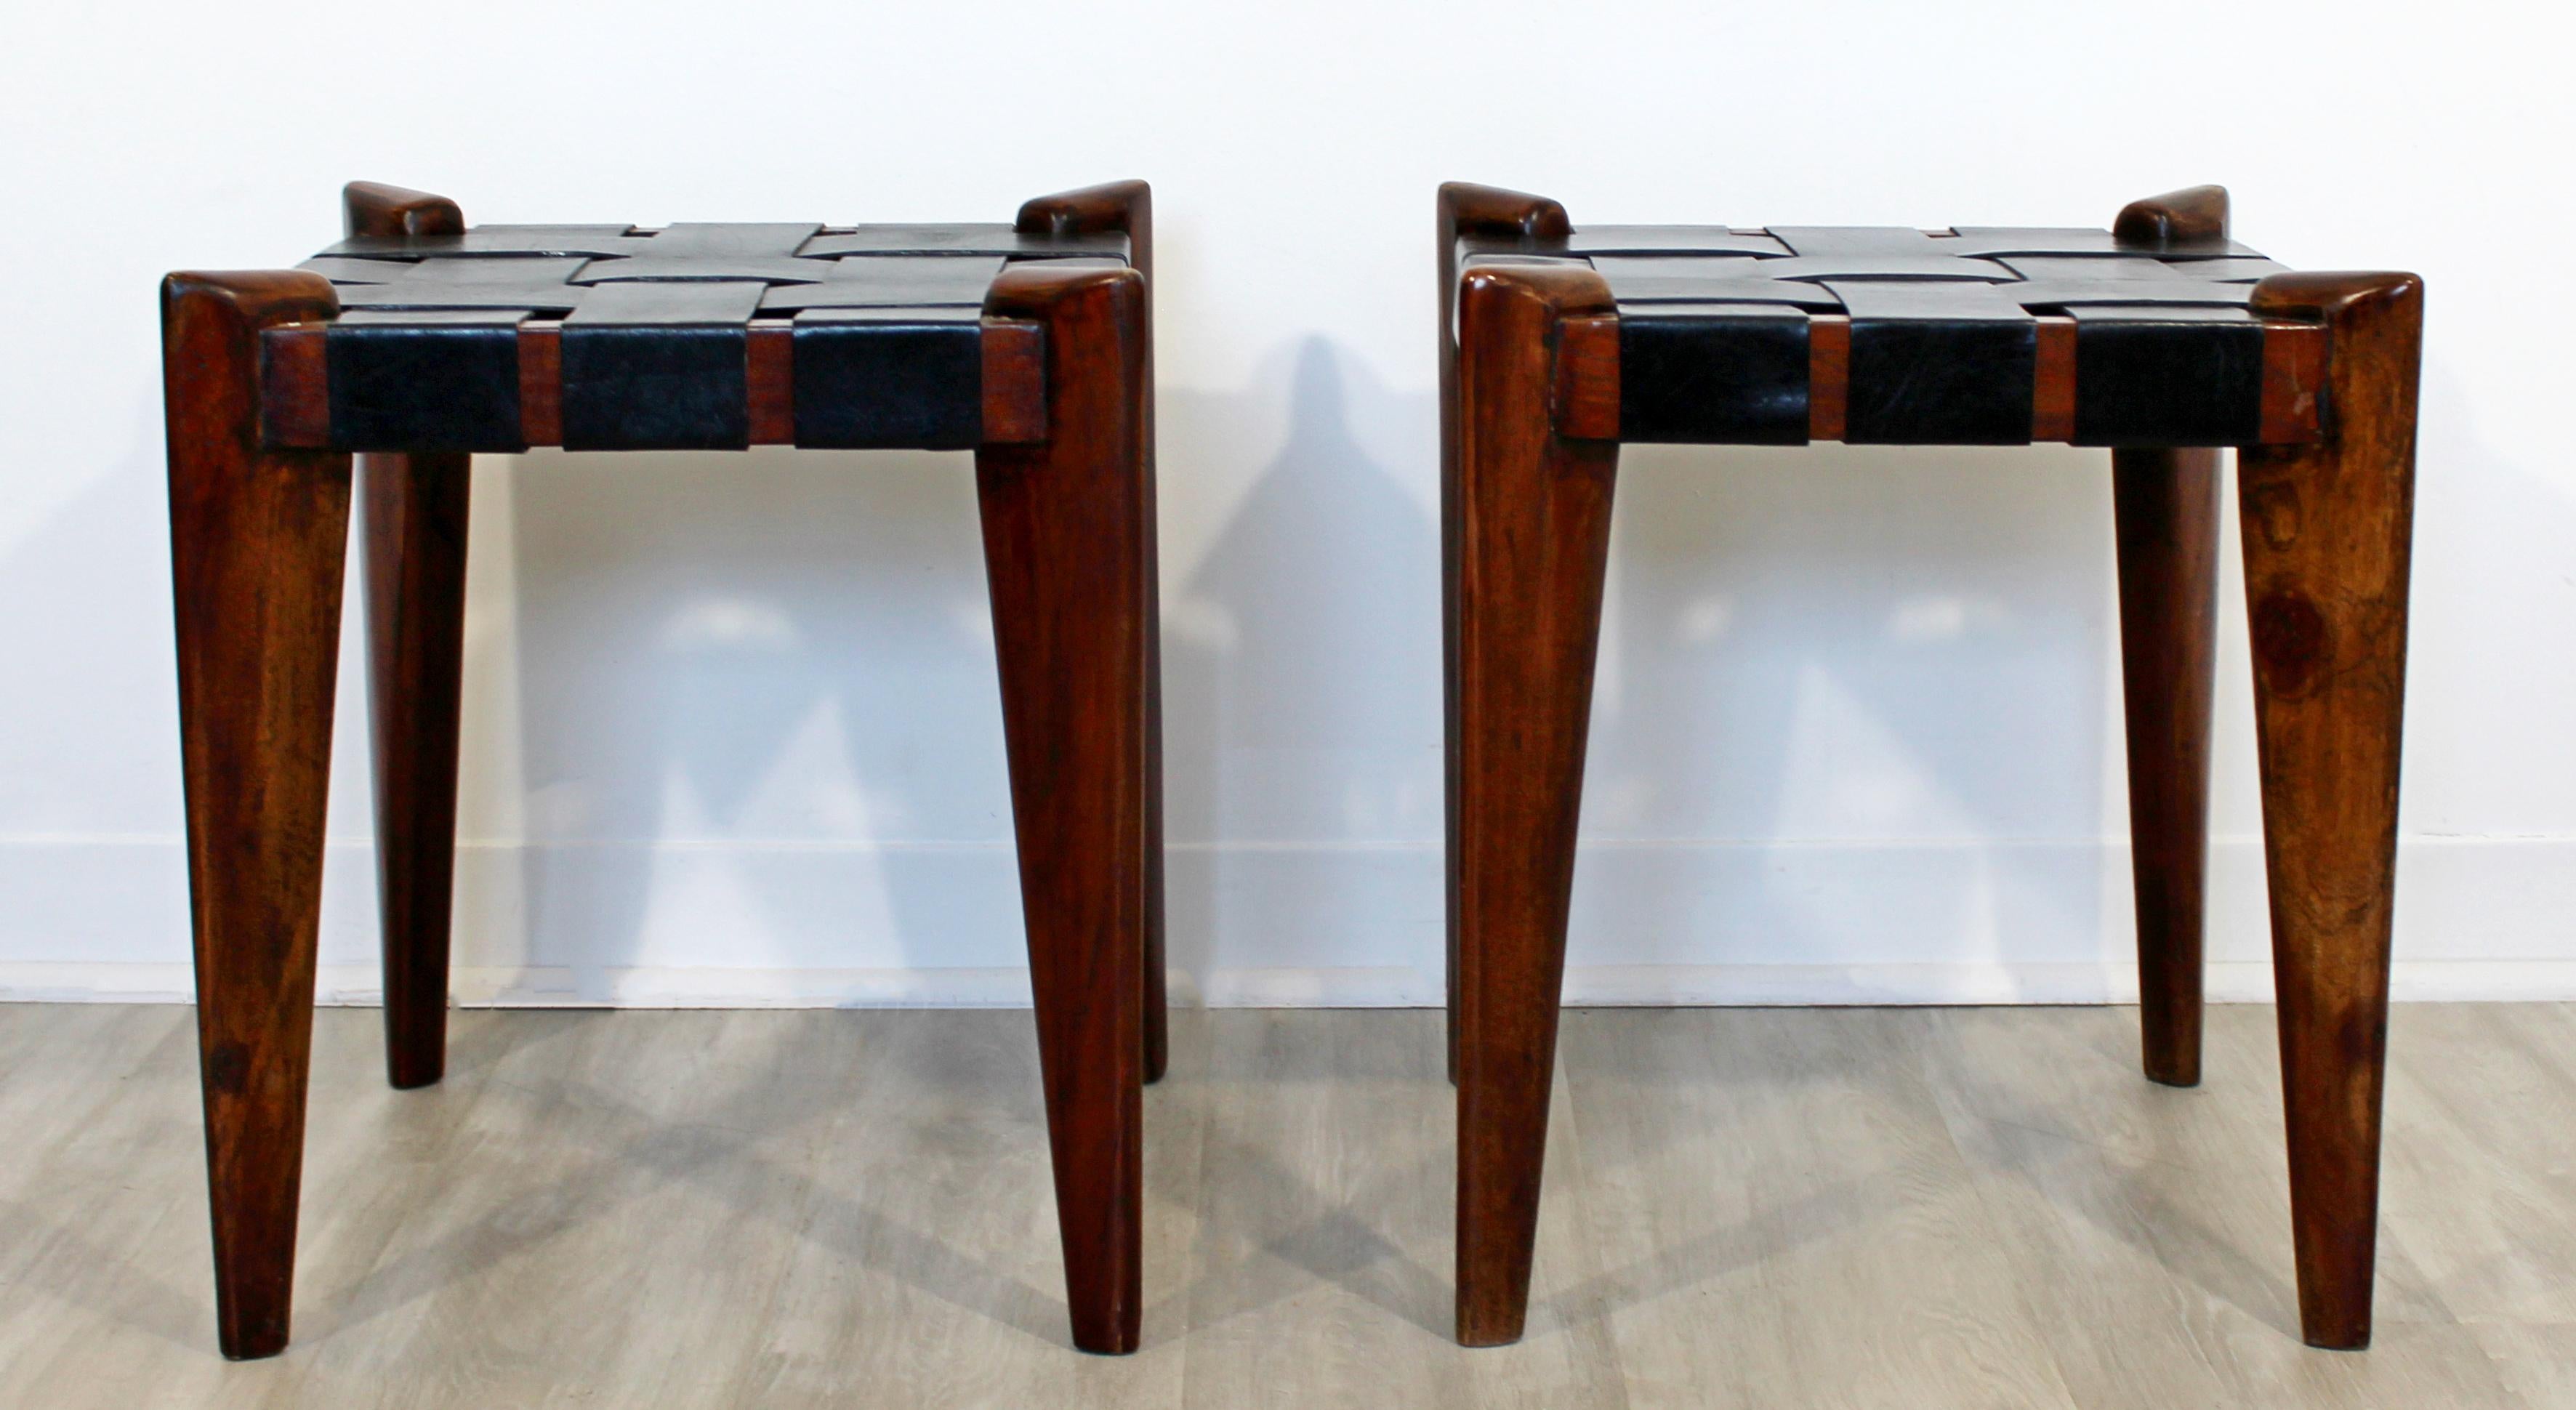 For your consideration is a rare pair of ebonized wood bench stools, with woven black leather seats, by Edmund Spence, circa 1960s. In excellent vintage condition. The dimensions of each are 16